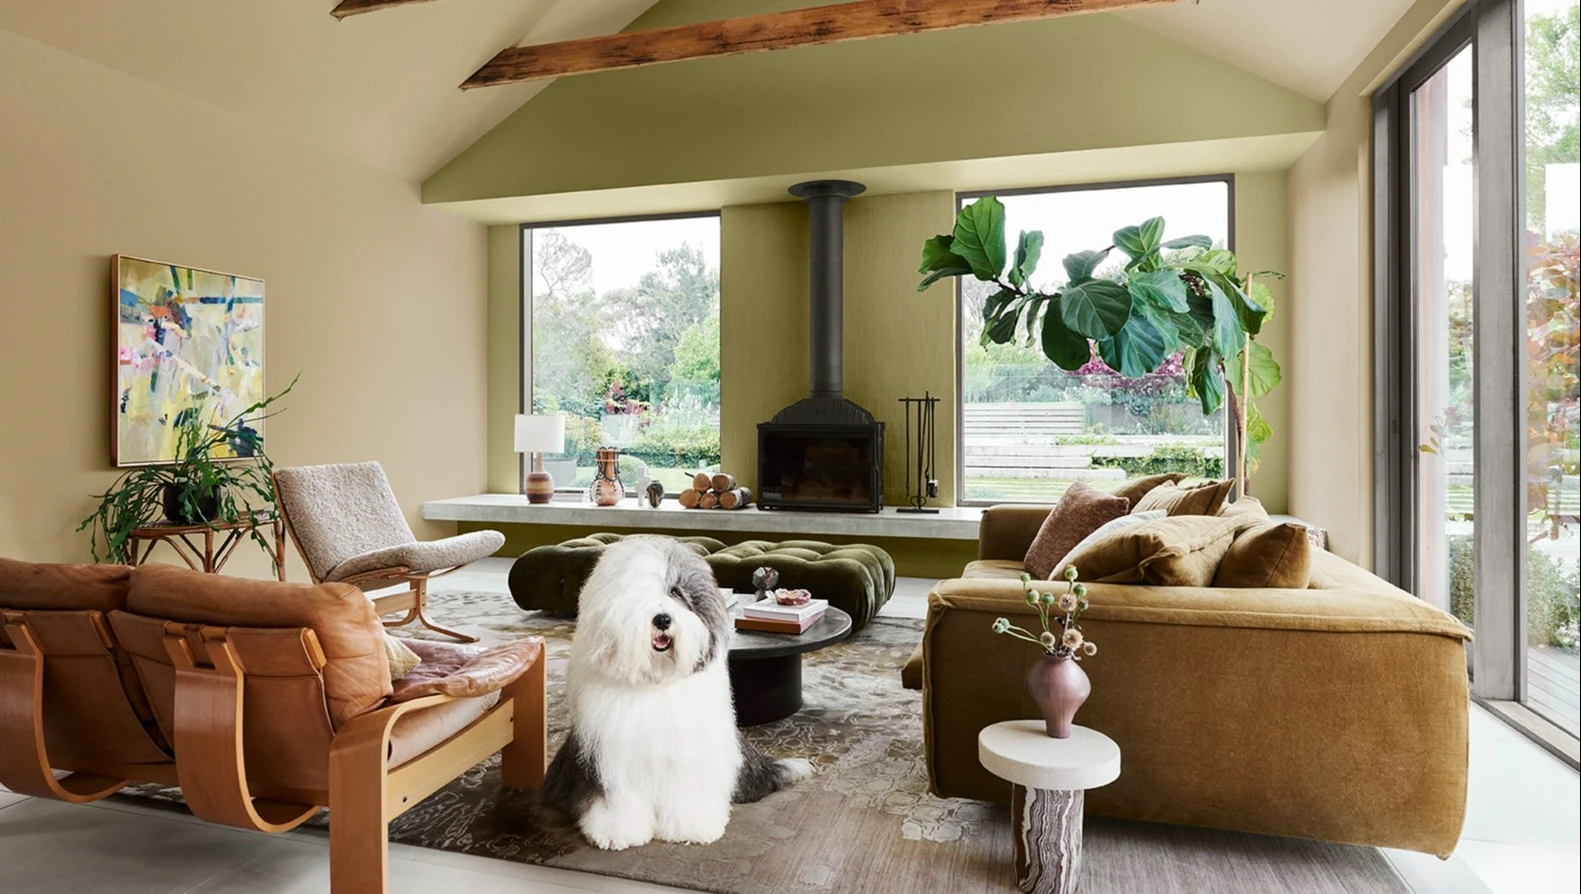 Dulux dog in a neutral, earthy living space featuring a velvet leather lounge and fireplace.